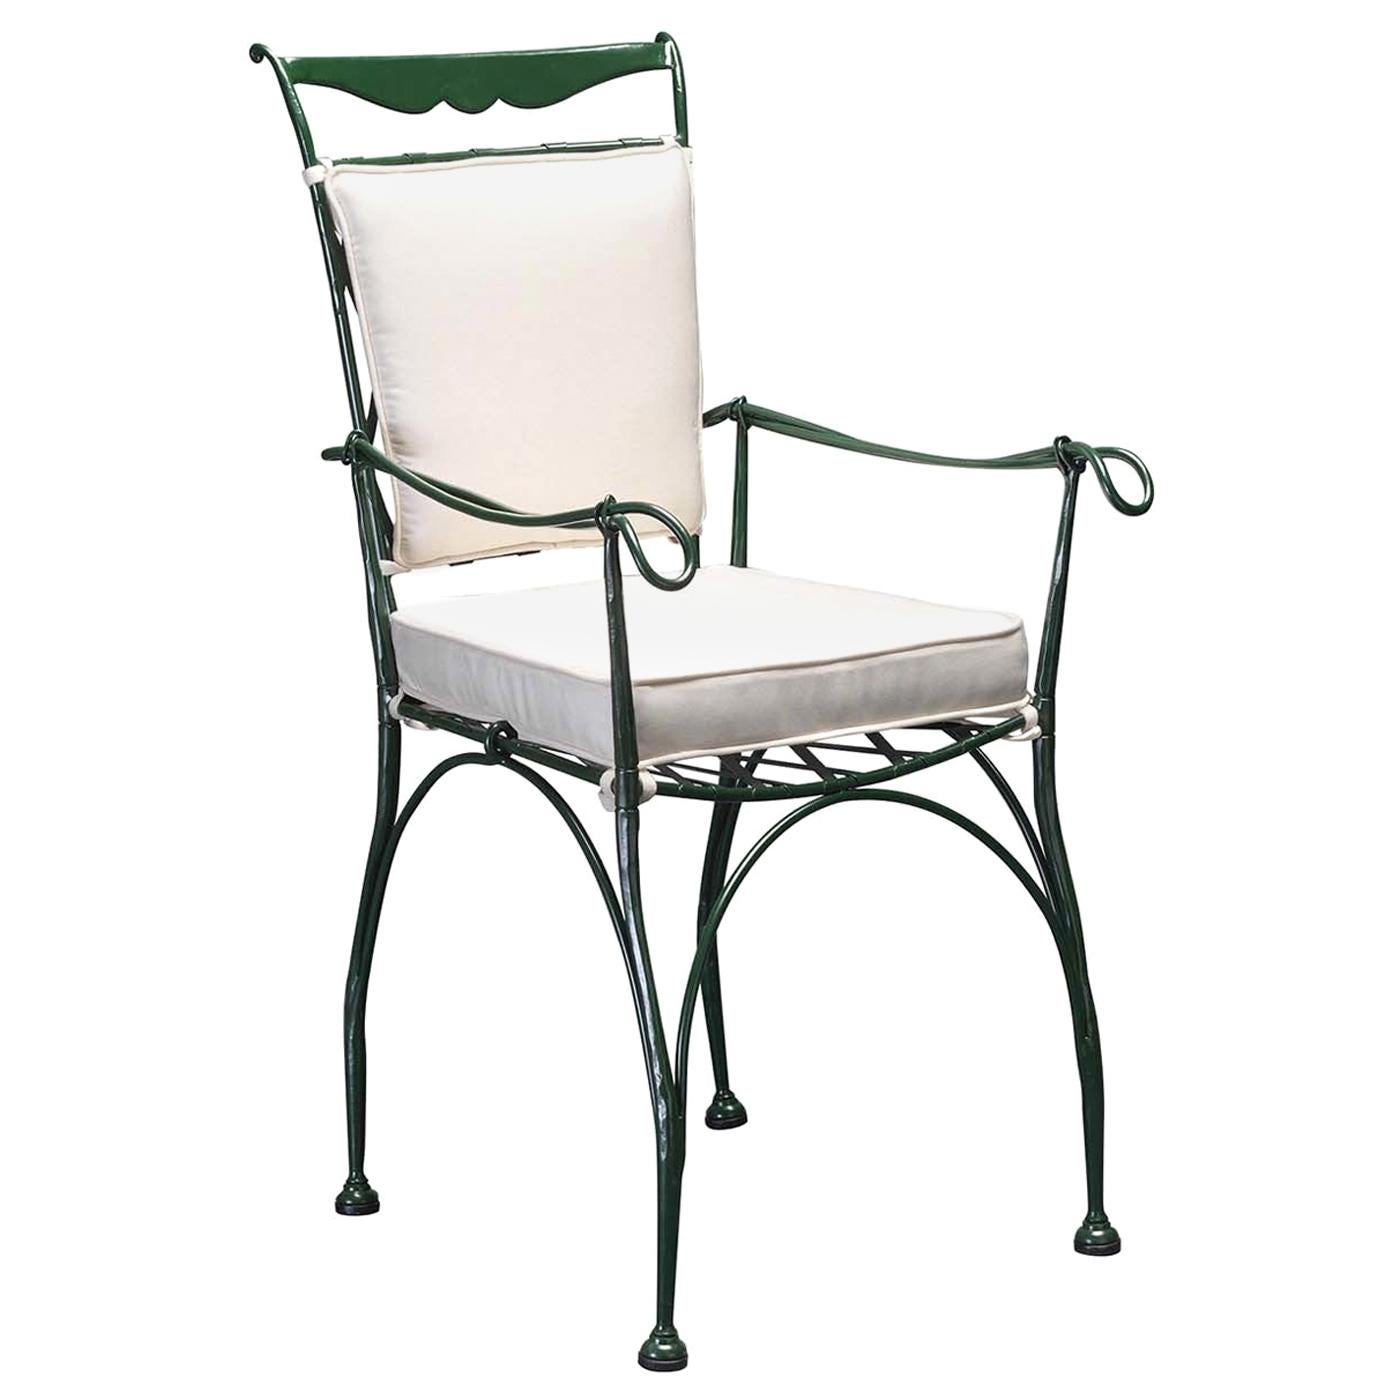 Florio Outdoor Chair with Armrests